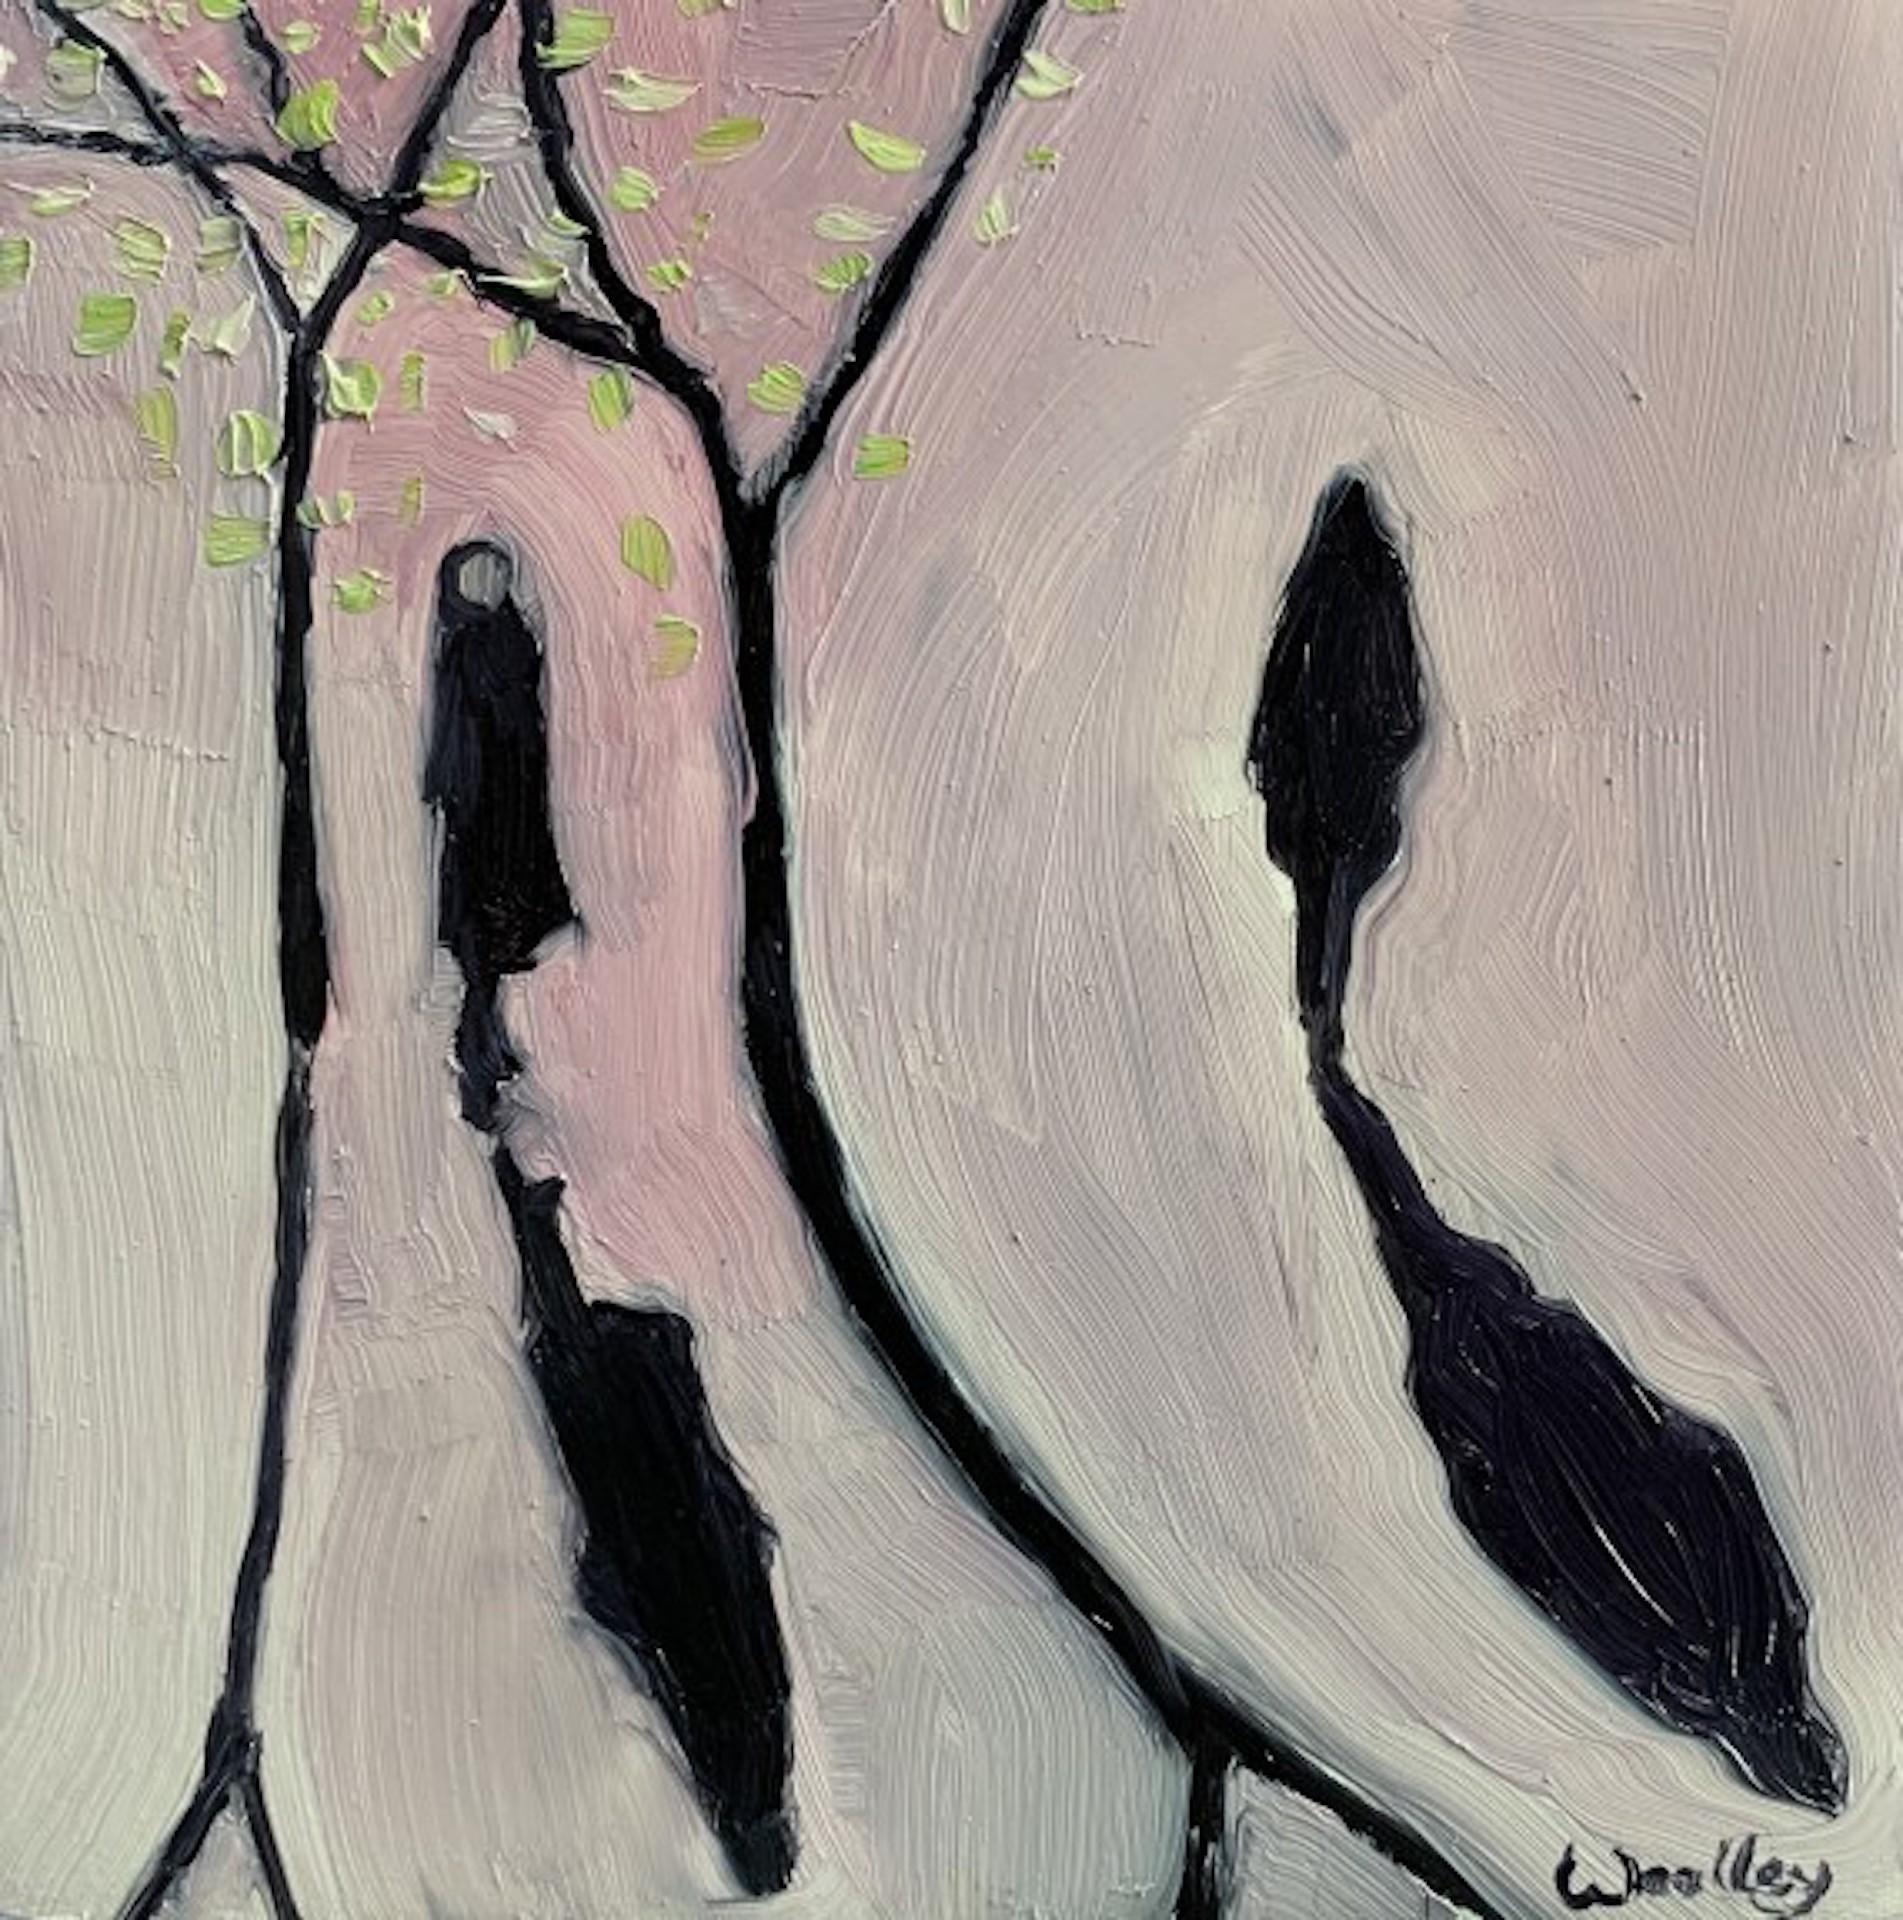 Winter Shadows 24 By Eleanor Woolley [2021]
Original
Oil paint
Image size: H:15 cm x W:15 cm
Complete Size of Unframed Work: H:15 cm x W:15 cm x D:3.5cm
Sold Unframed
Please note that insitu images are purely an indication of how a piece may